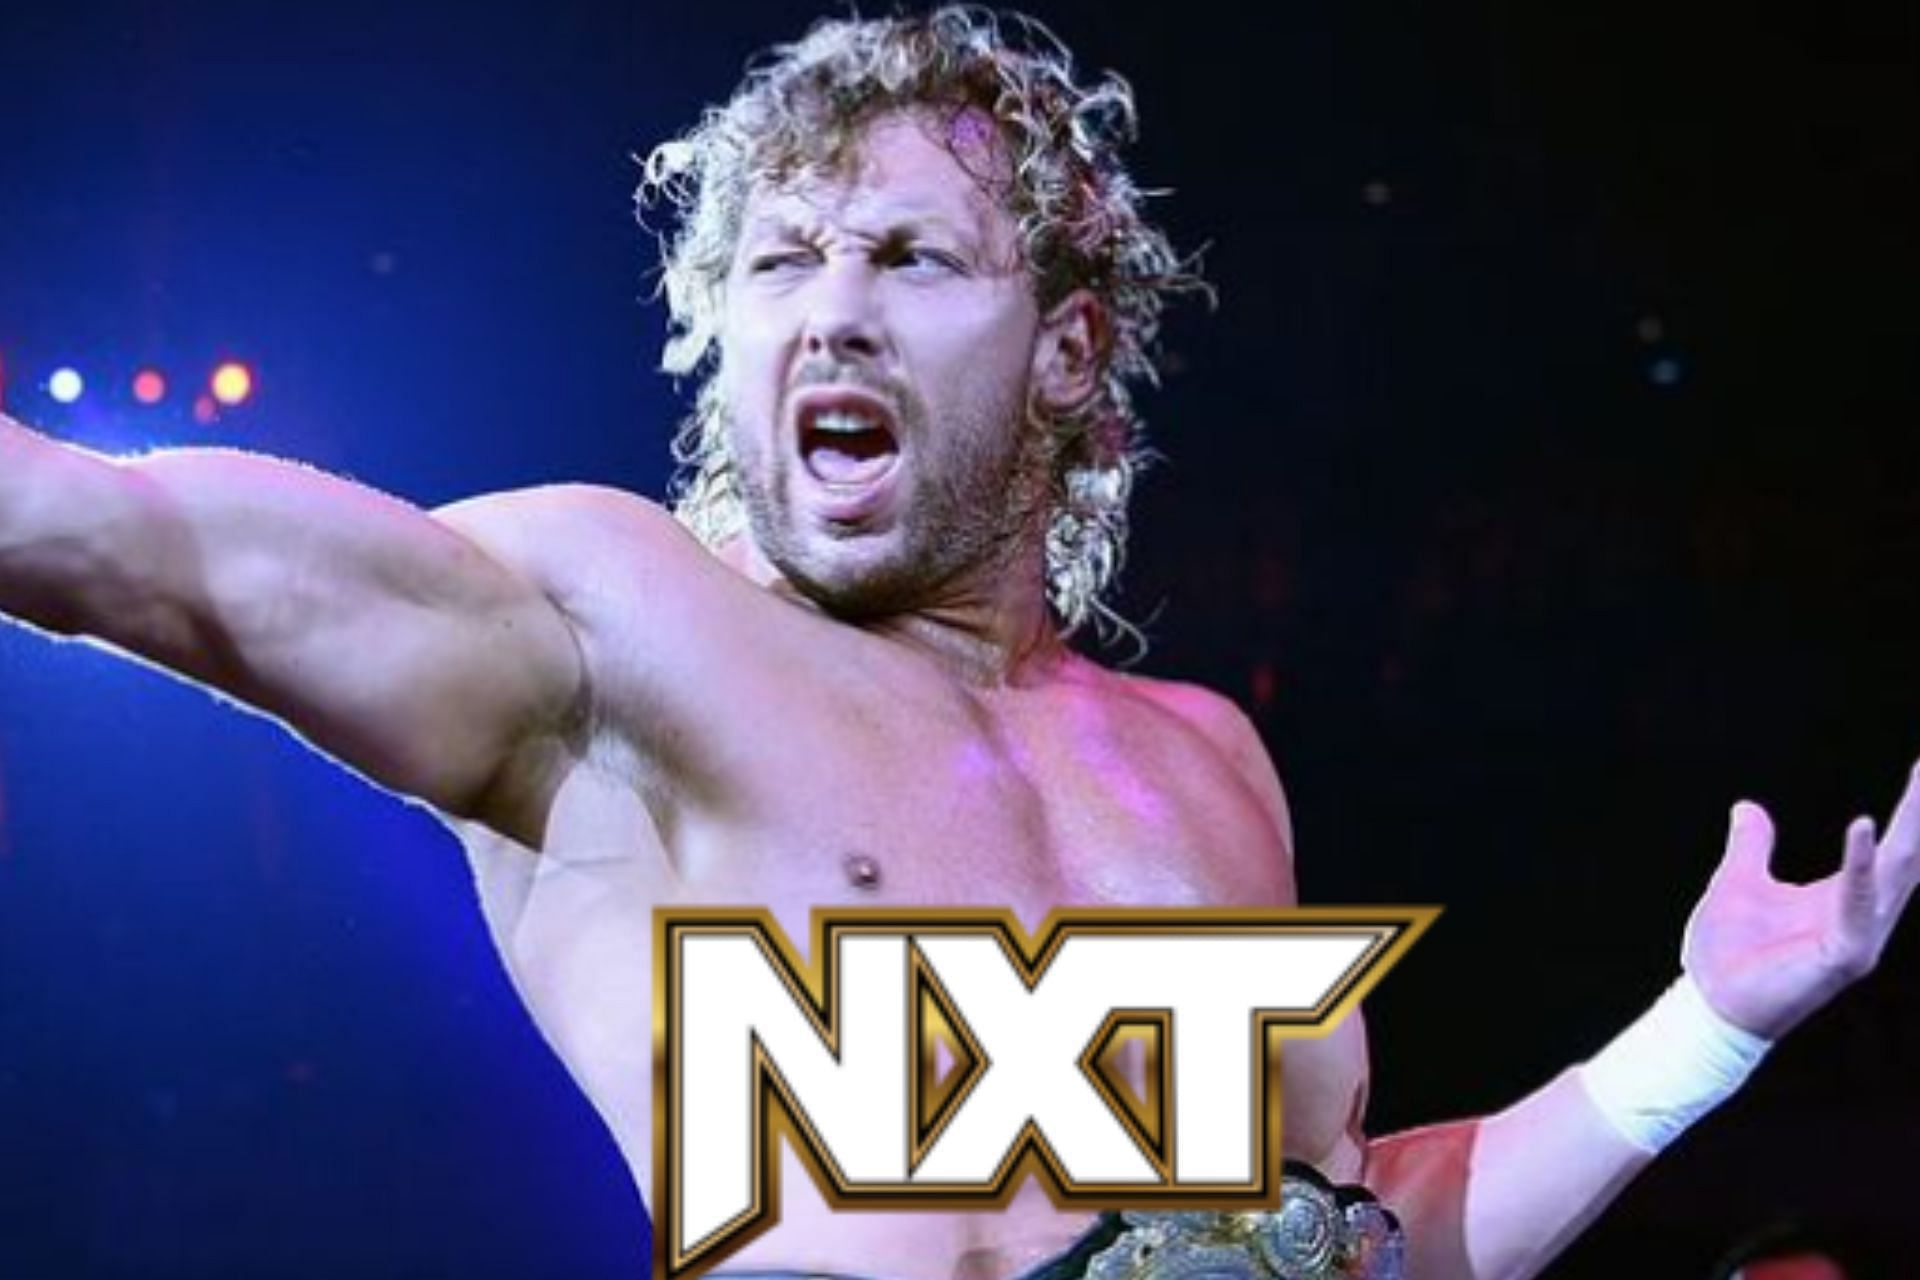 Kenny Omega has his sights on an NXT wrestler as one of his future opponents [Image Credits: Kenny Omega AEW and wwe.com